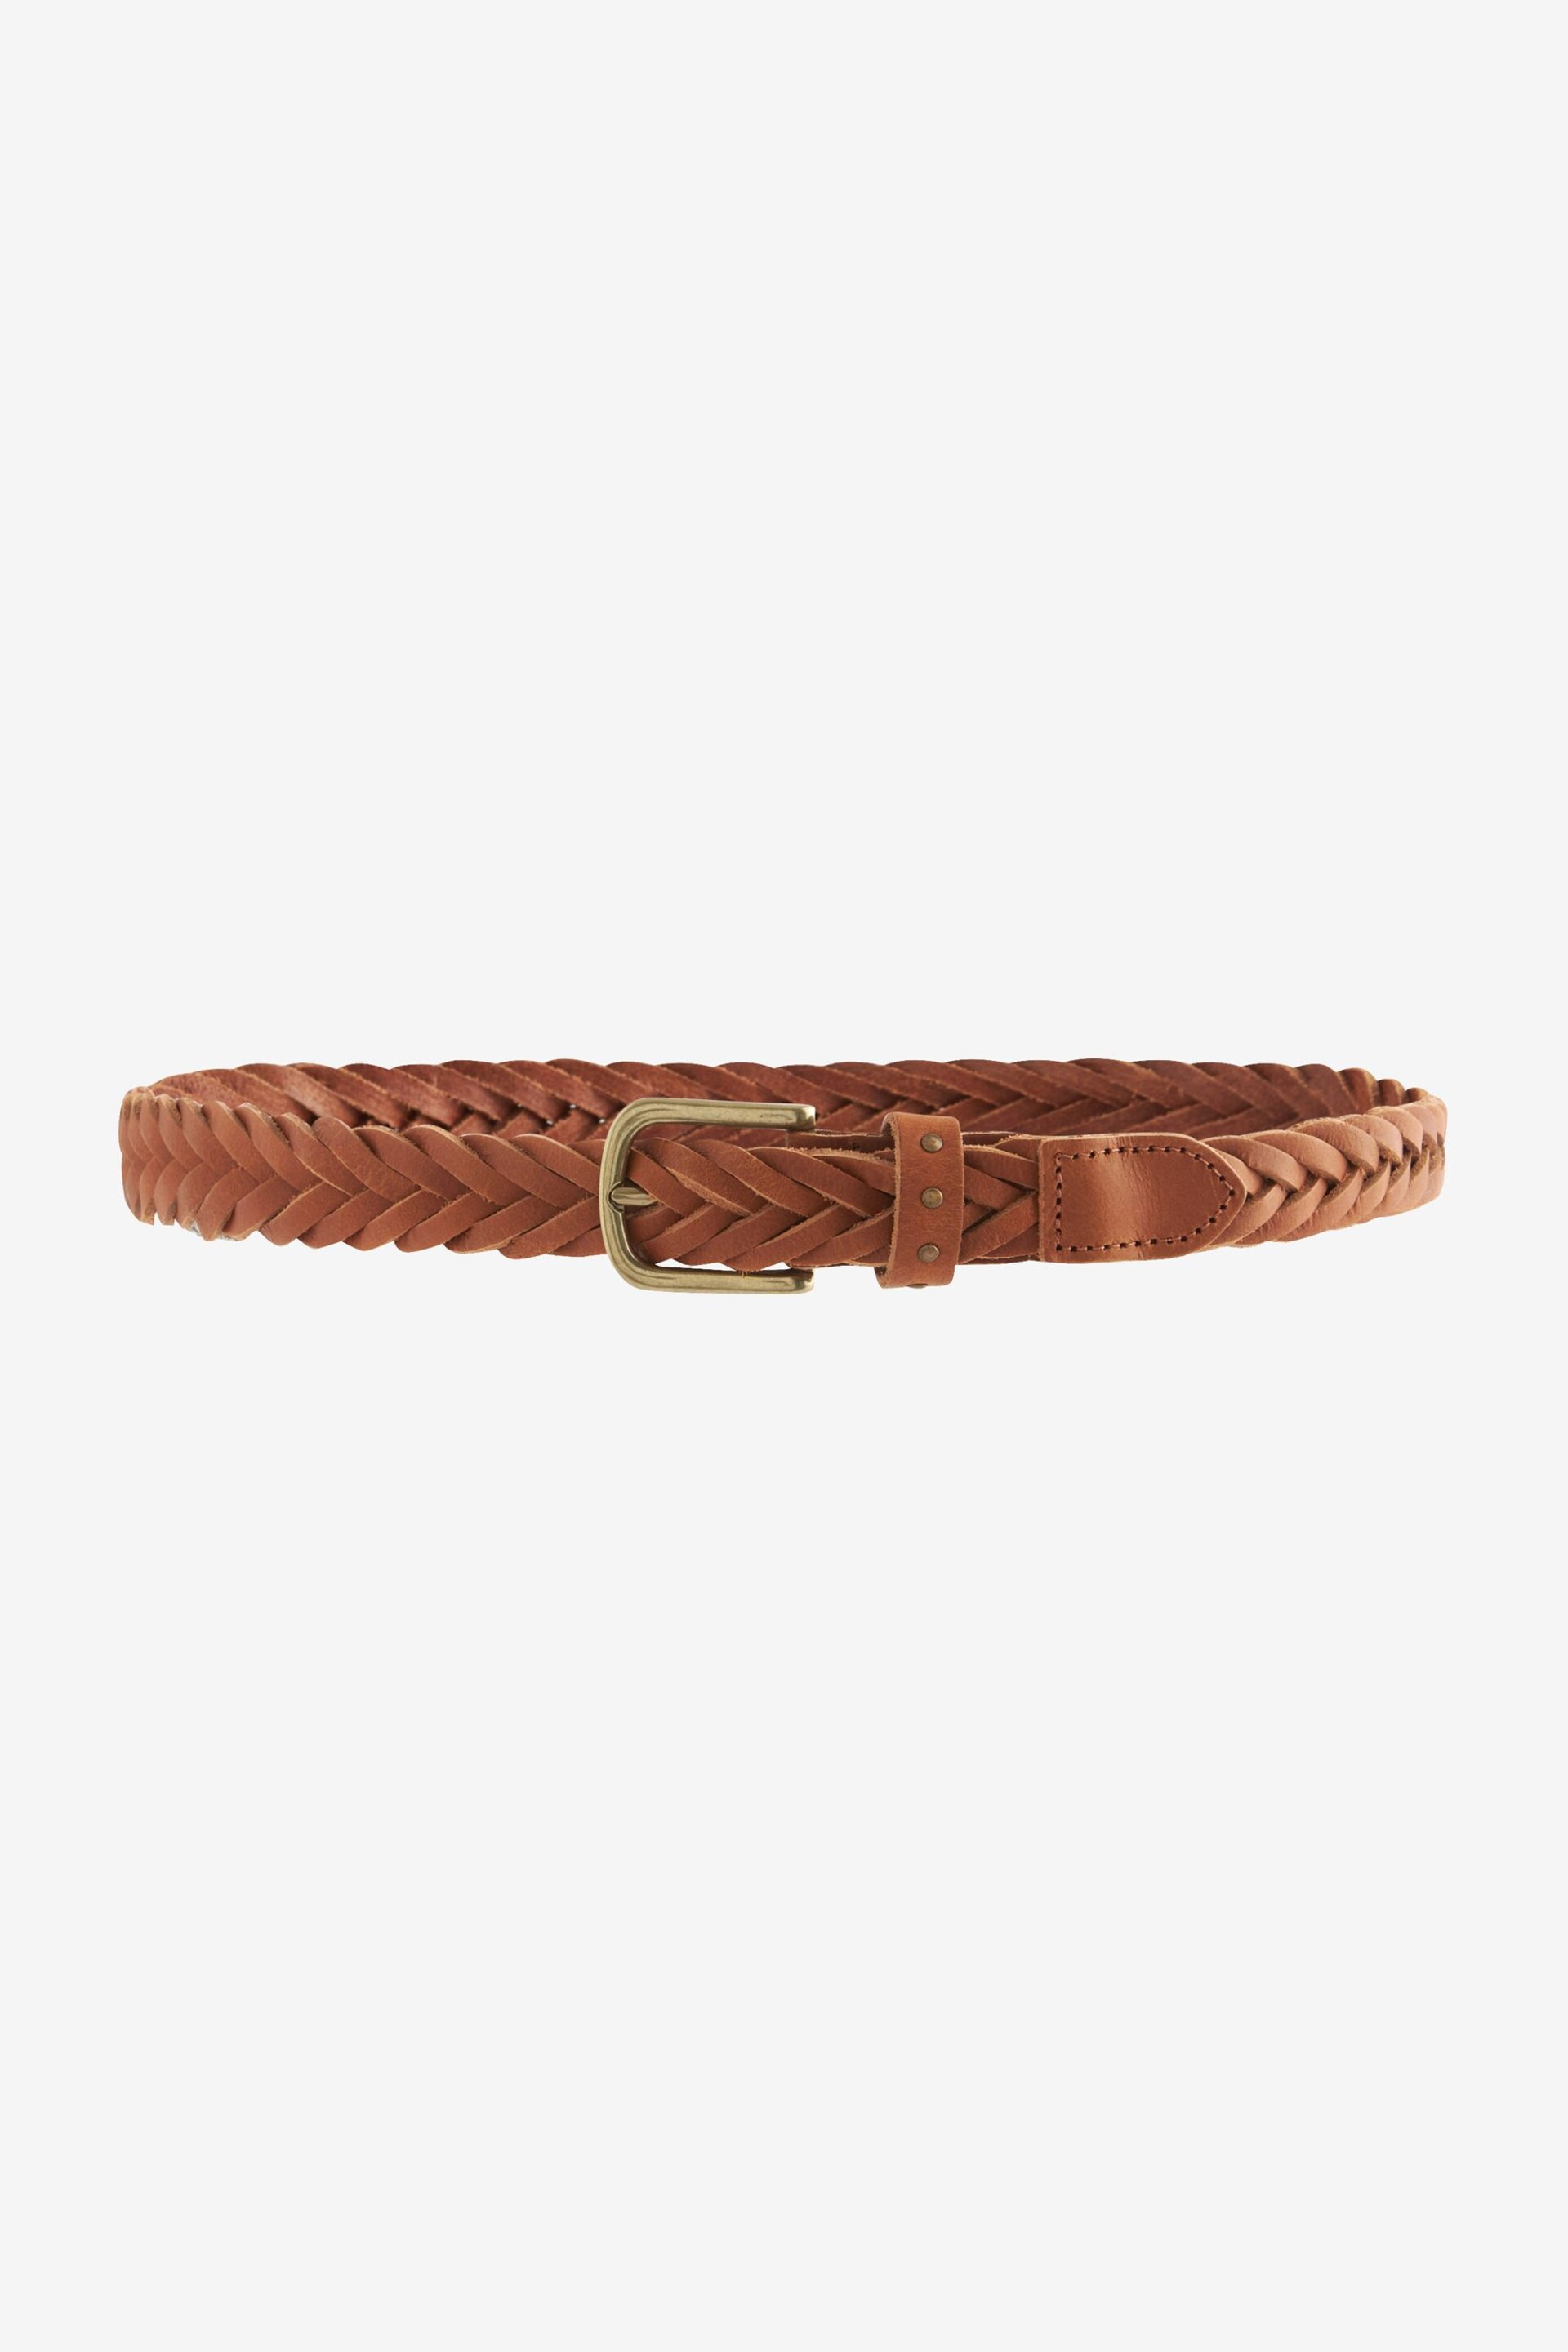 Tan Brown Plaited Leather Belt - Image 1 of 4